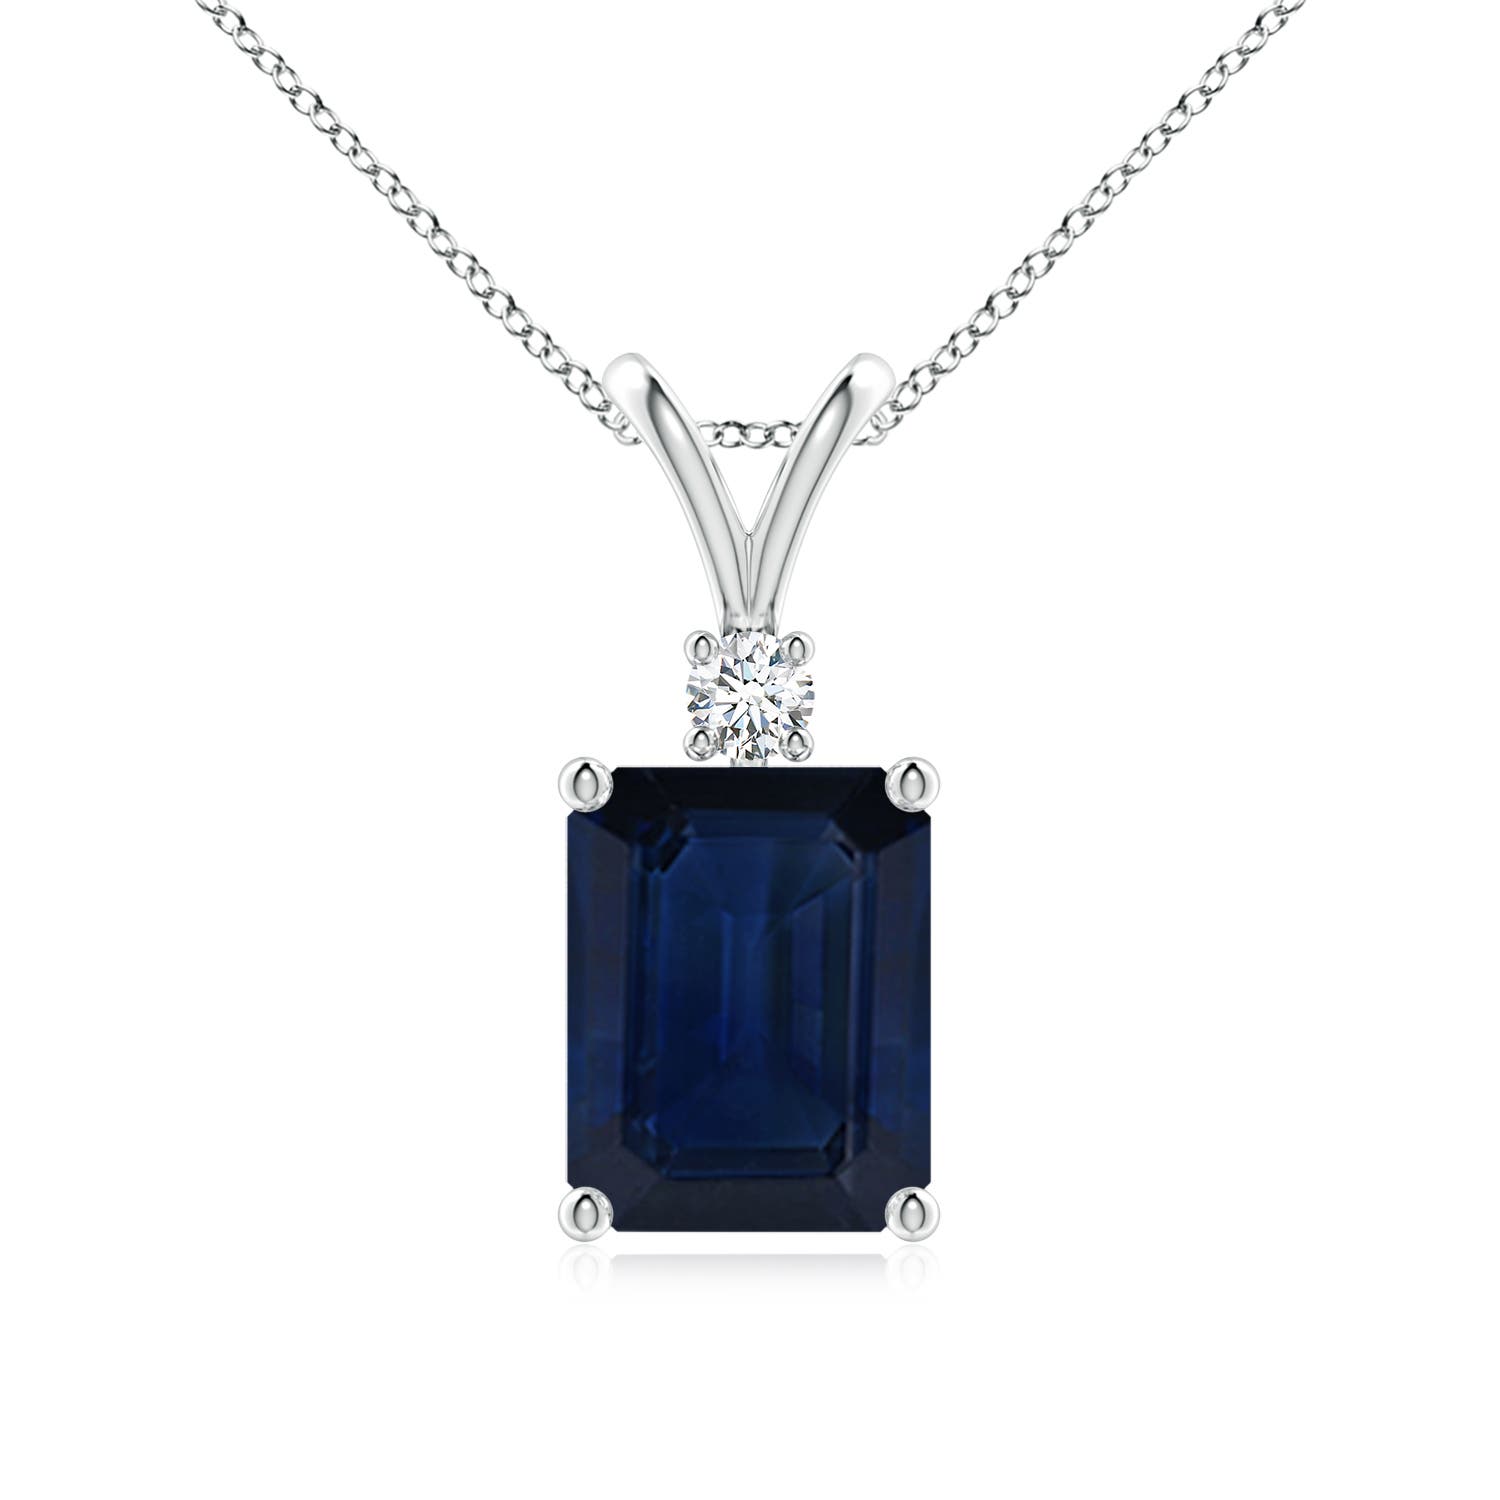 AA - Blue Sapphire / 2.52 CT / 14 KT White Gold